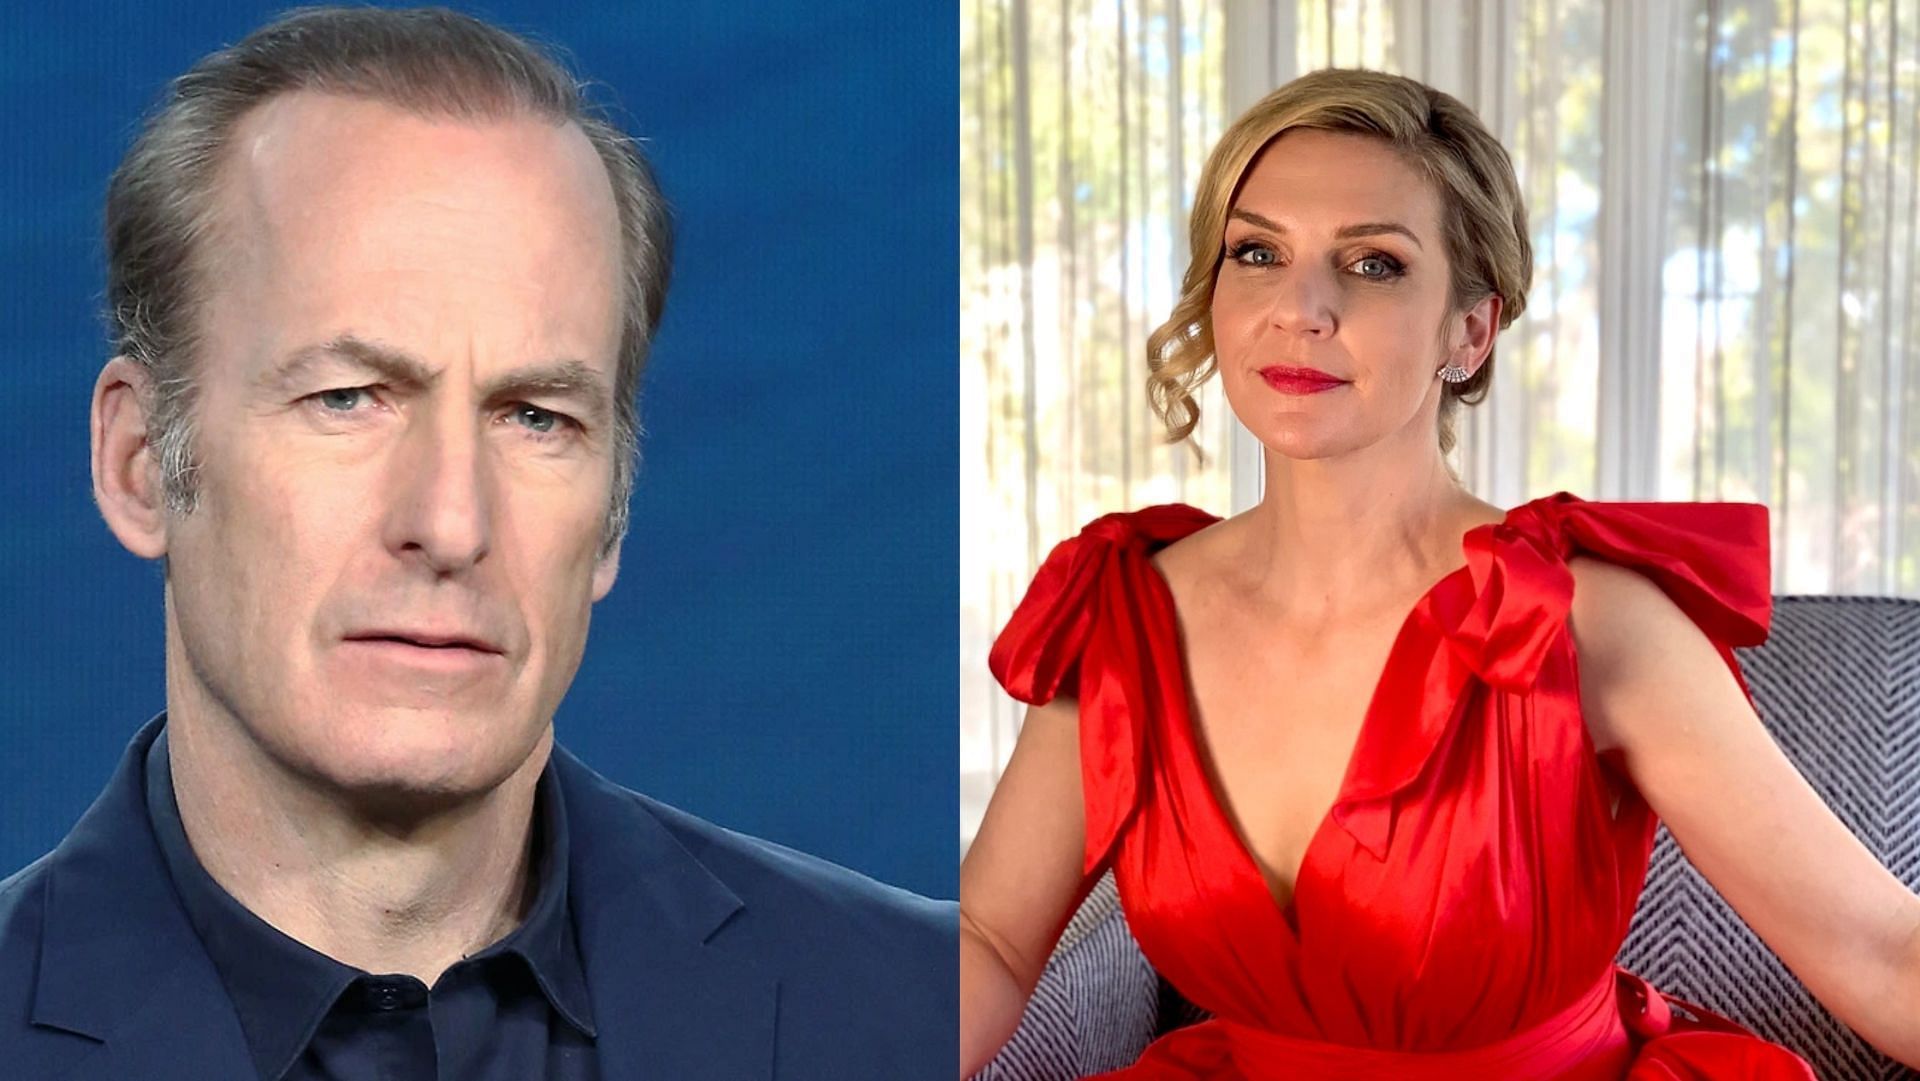 Bob Odenkirk and Rhea Seehorn lost the Emmy Awards to Lee Jung-jae and Julia Garner respectively. (Image via Tommaso Boddi/Getty, Hayley Grgurich/Getty)